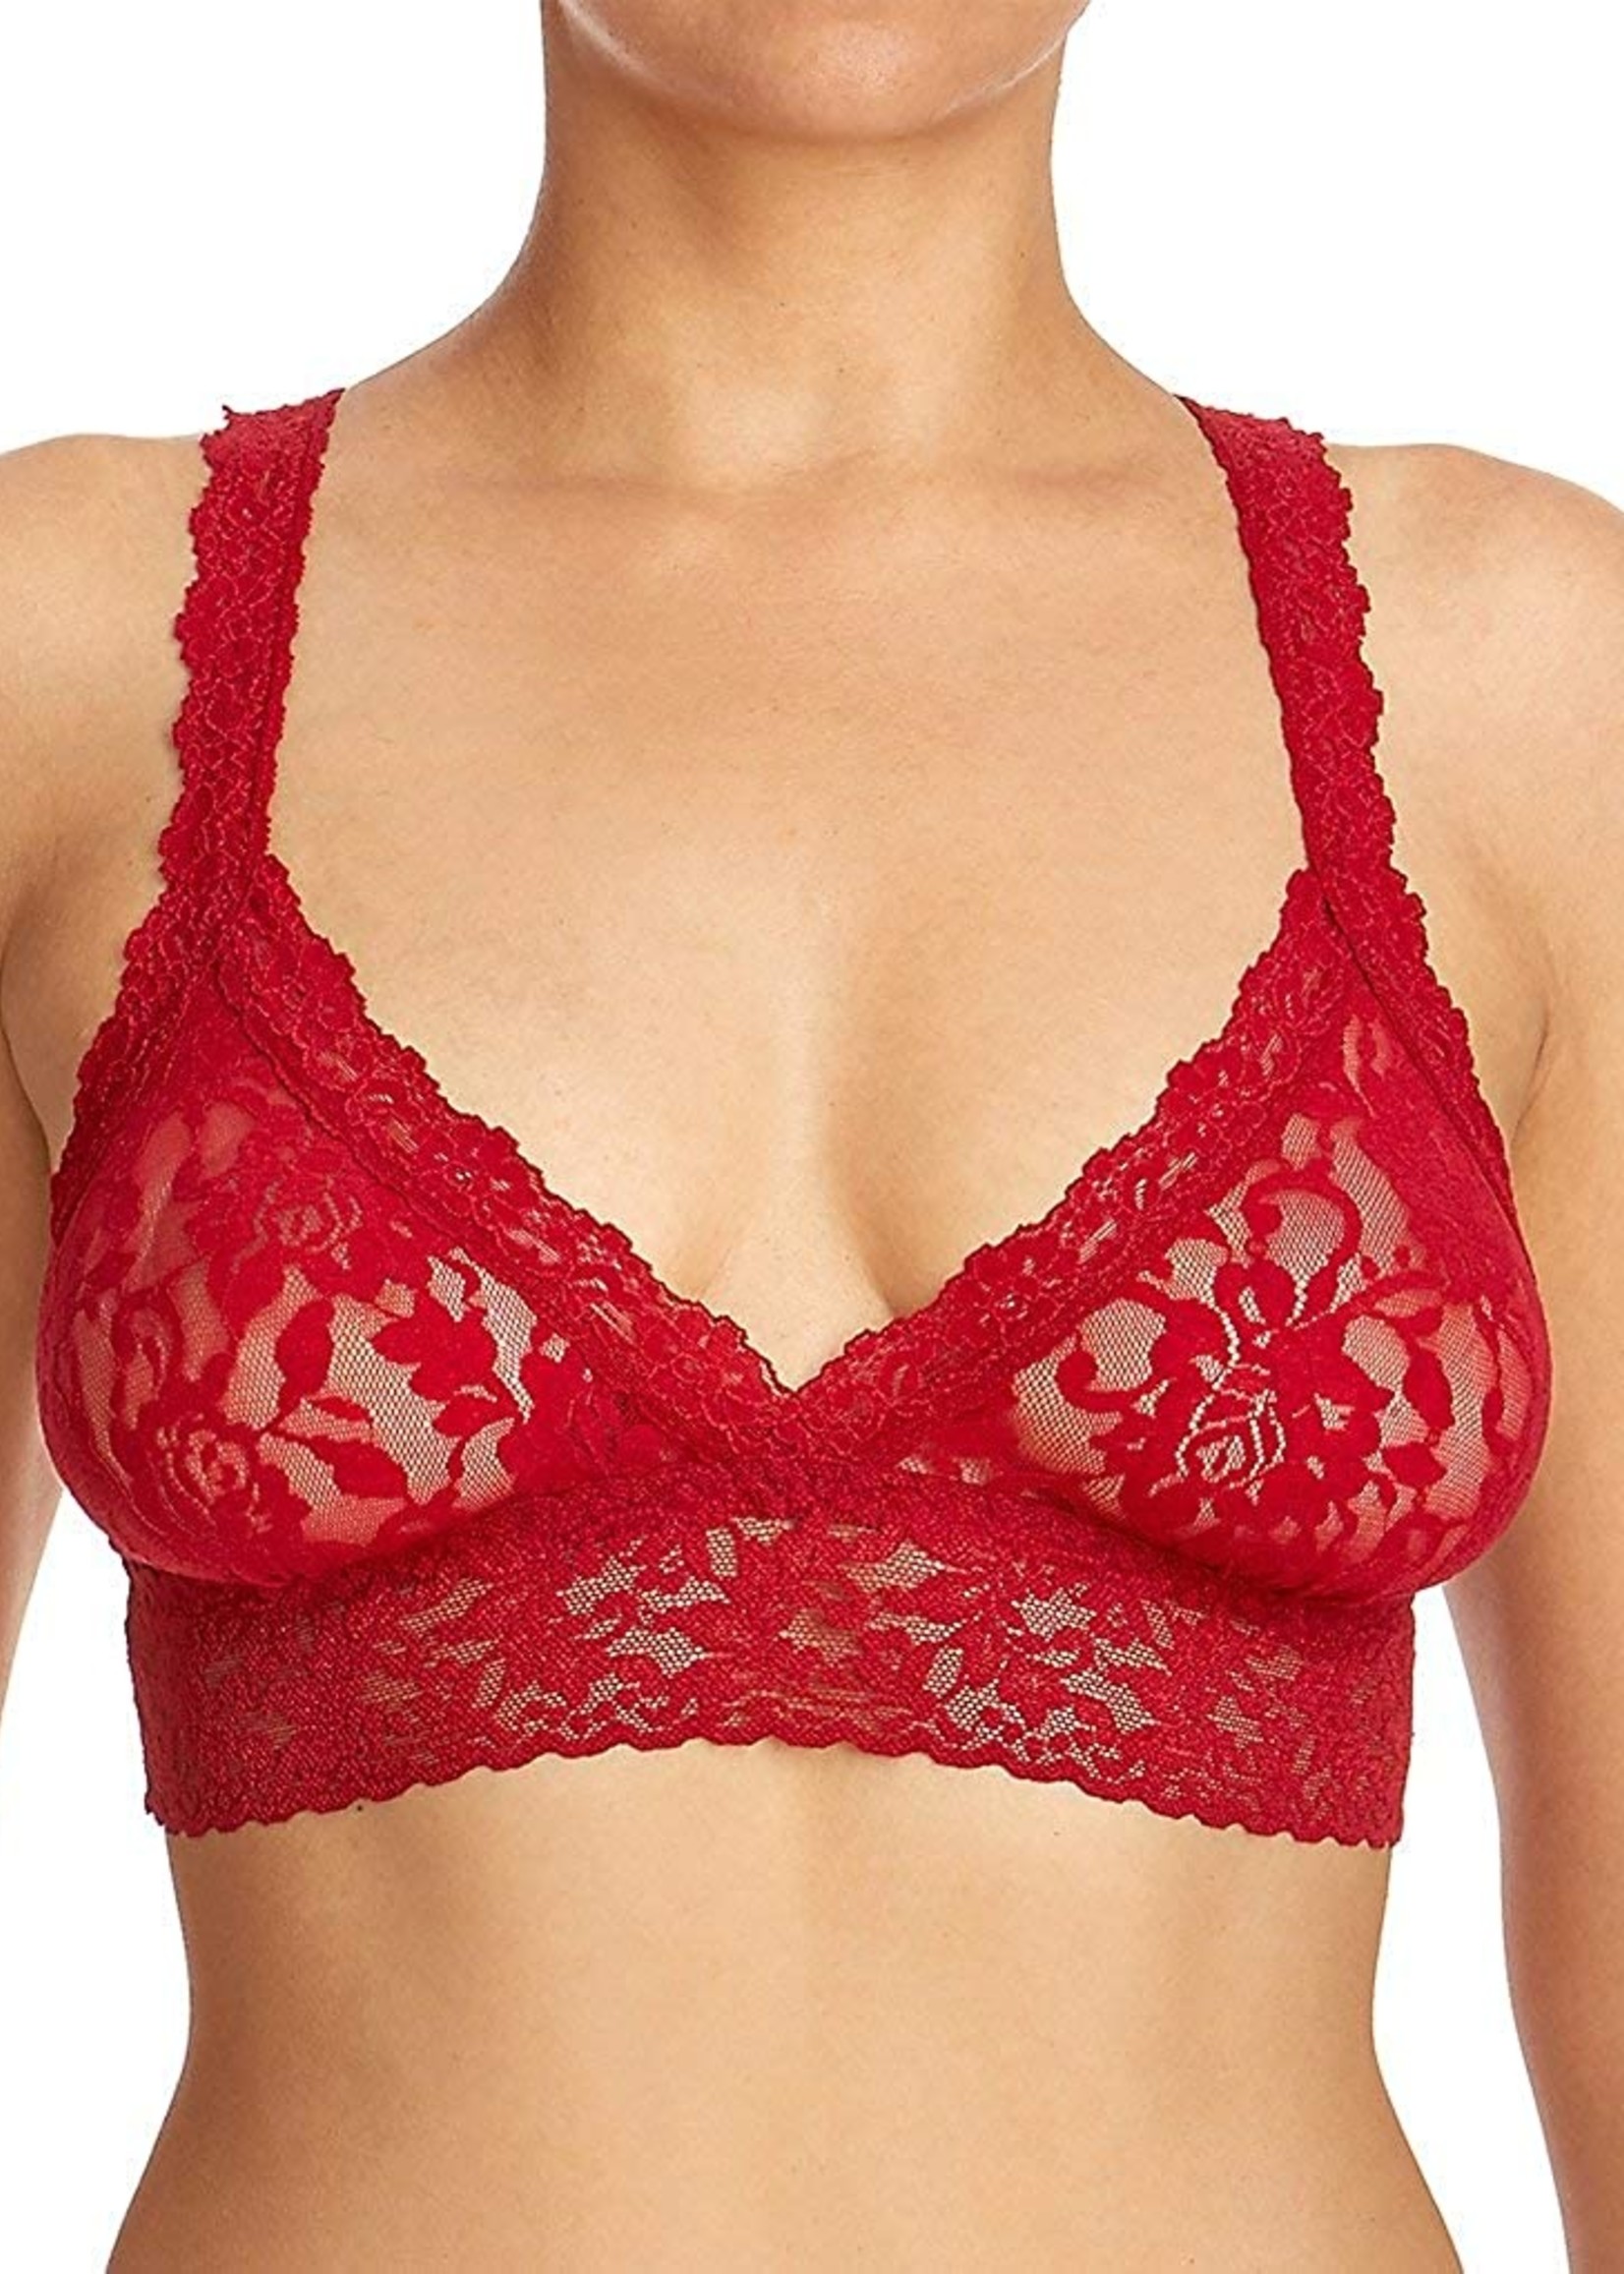 Hanky Panky Signature Lace Crossover Bralette